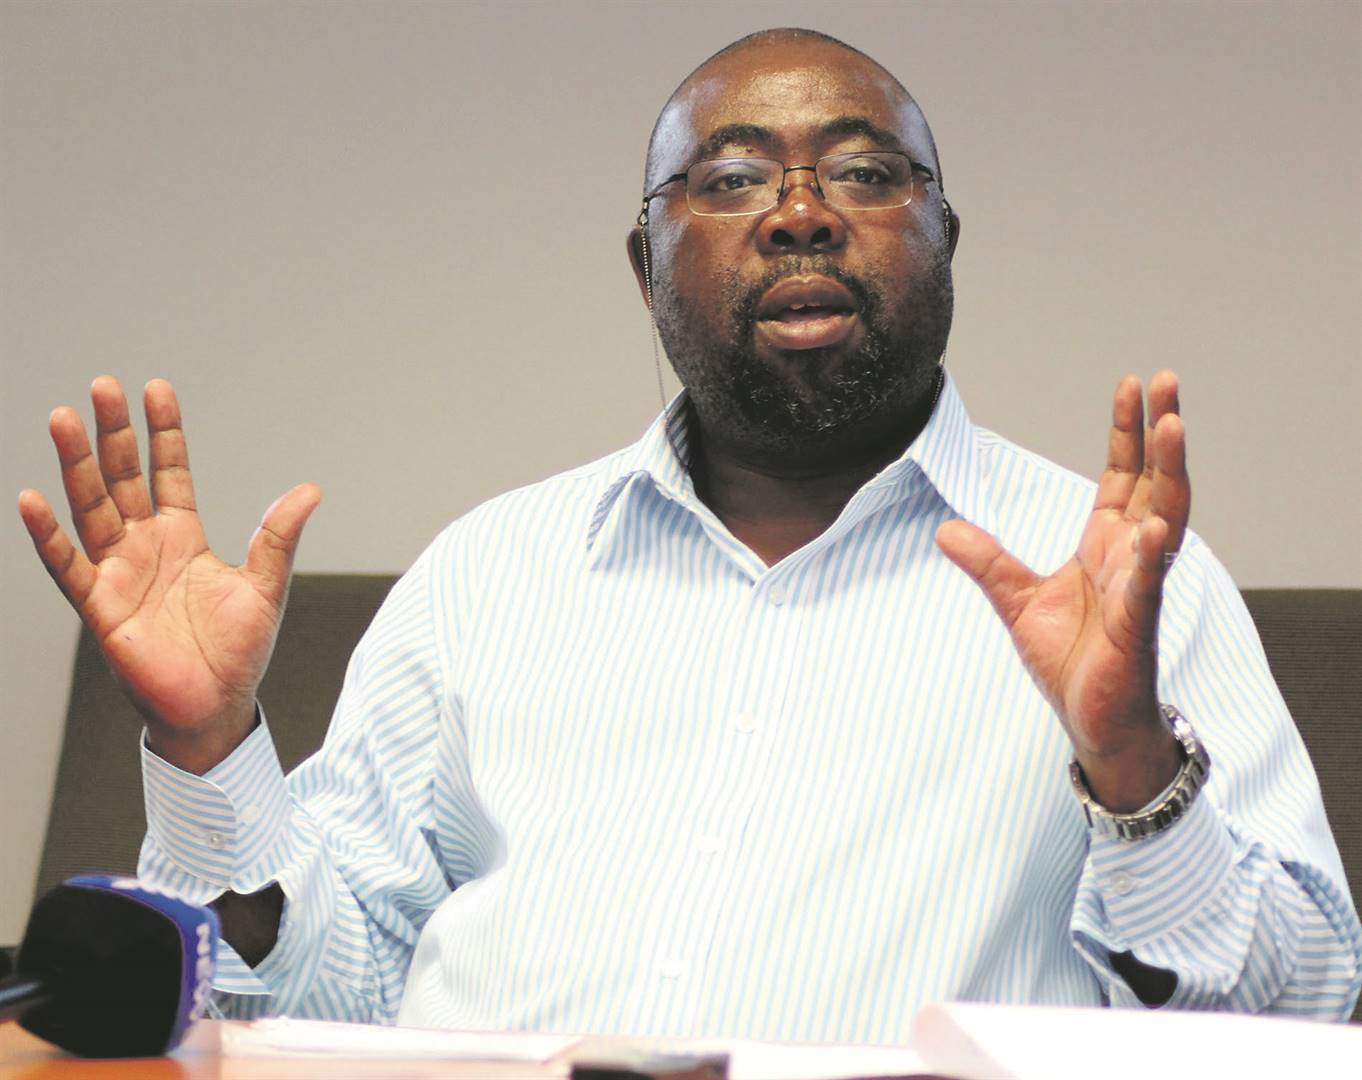 Department of Employment and Labour Thulas Nxesi sent Mdwaba a letter threatening to suspend him as head of Productivity SA.